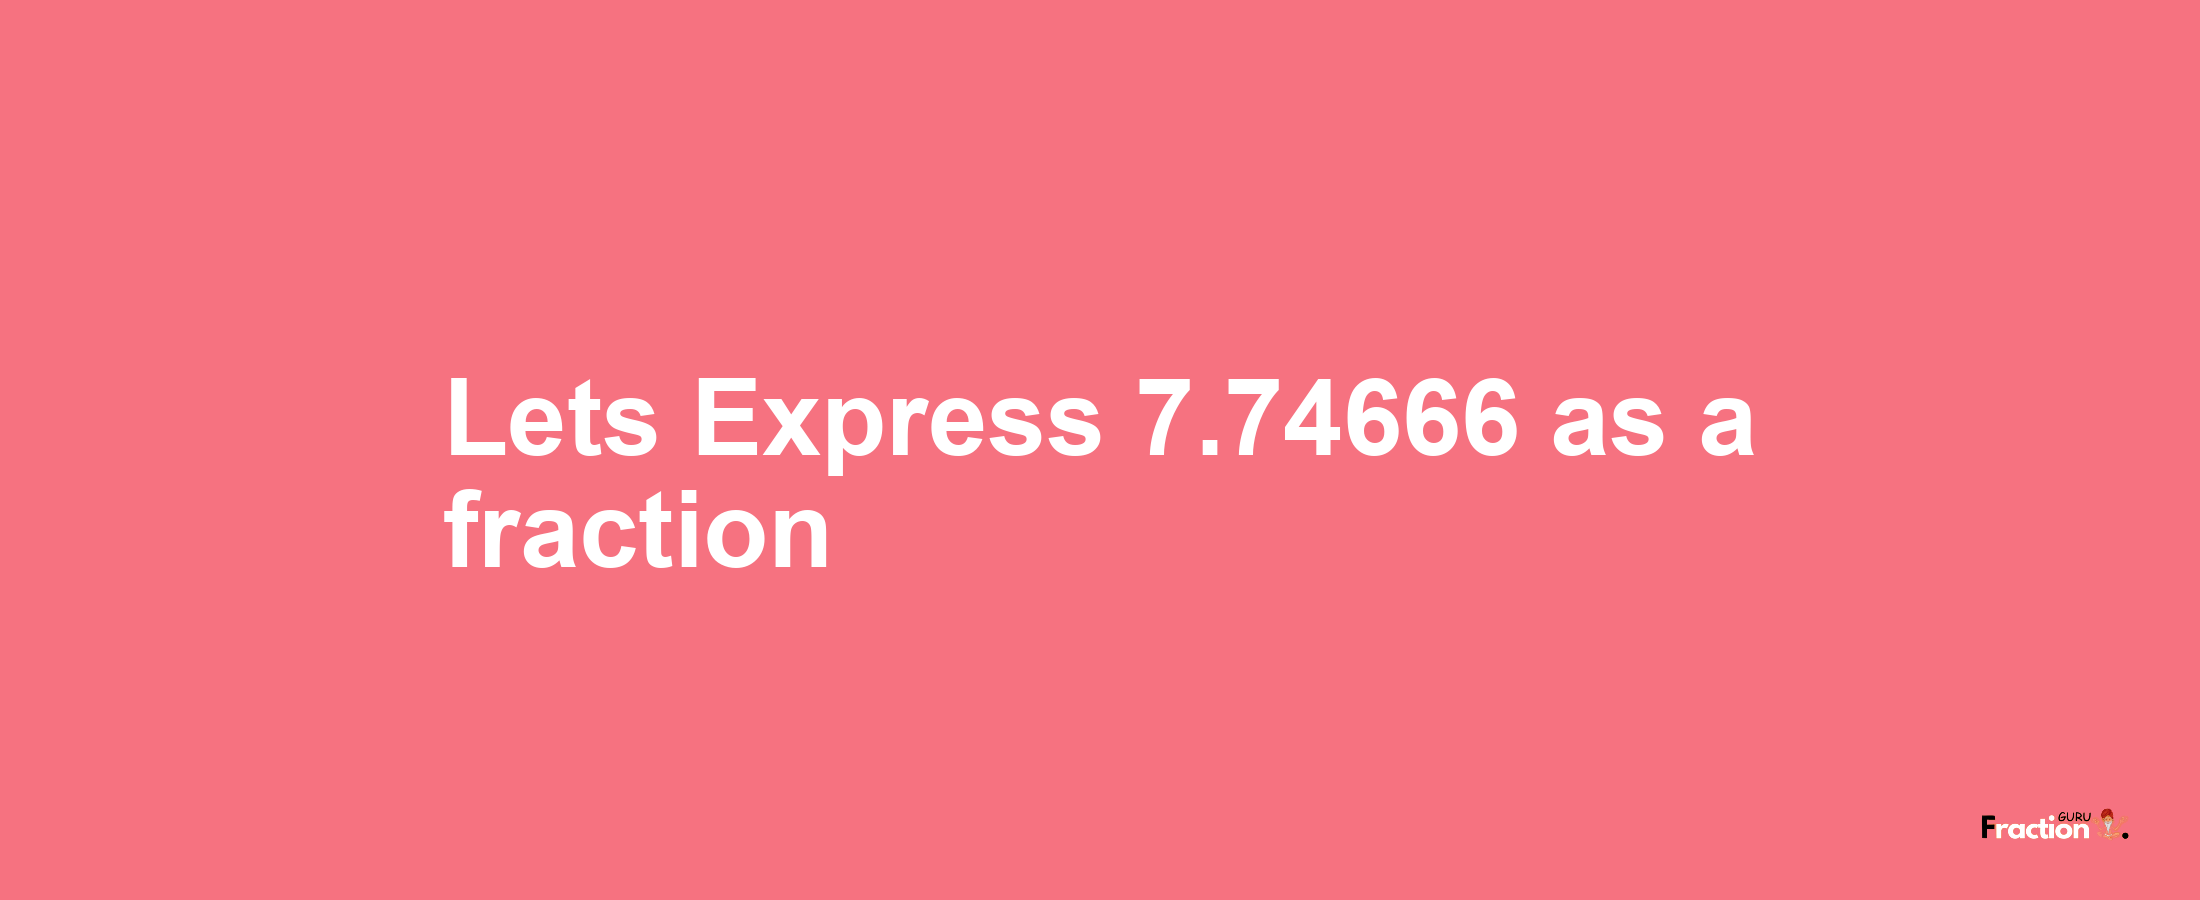 Lets Express 7.74666 as afraction